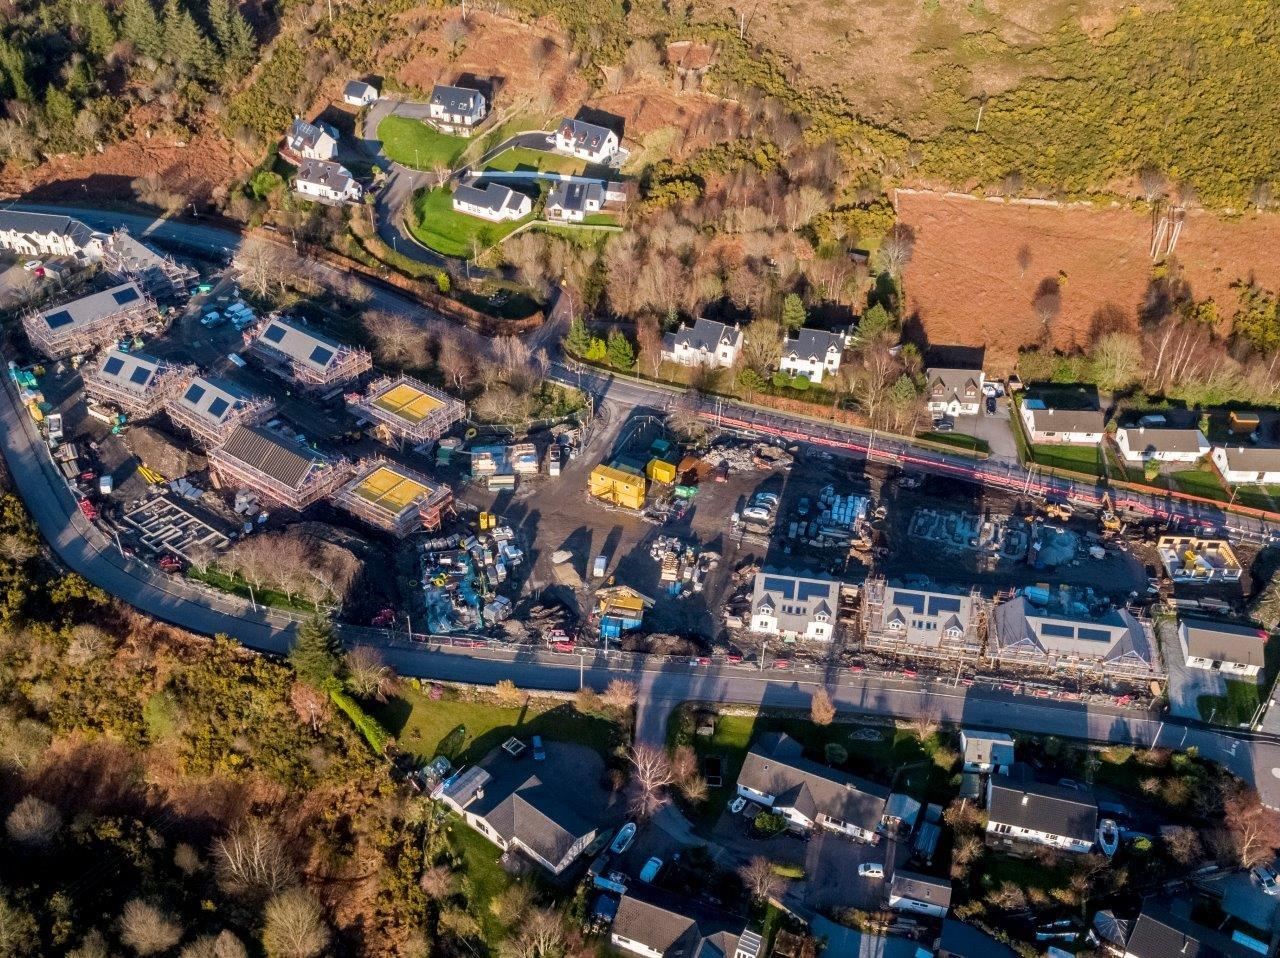 An aerial view of the site at Gledfield in Ullapool.